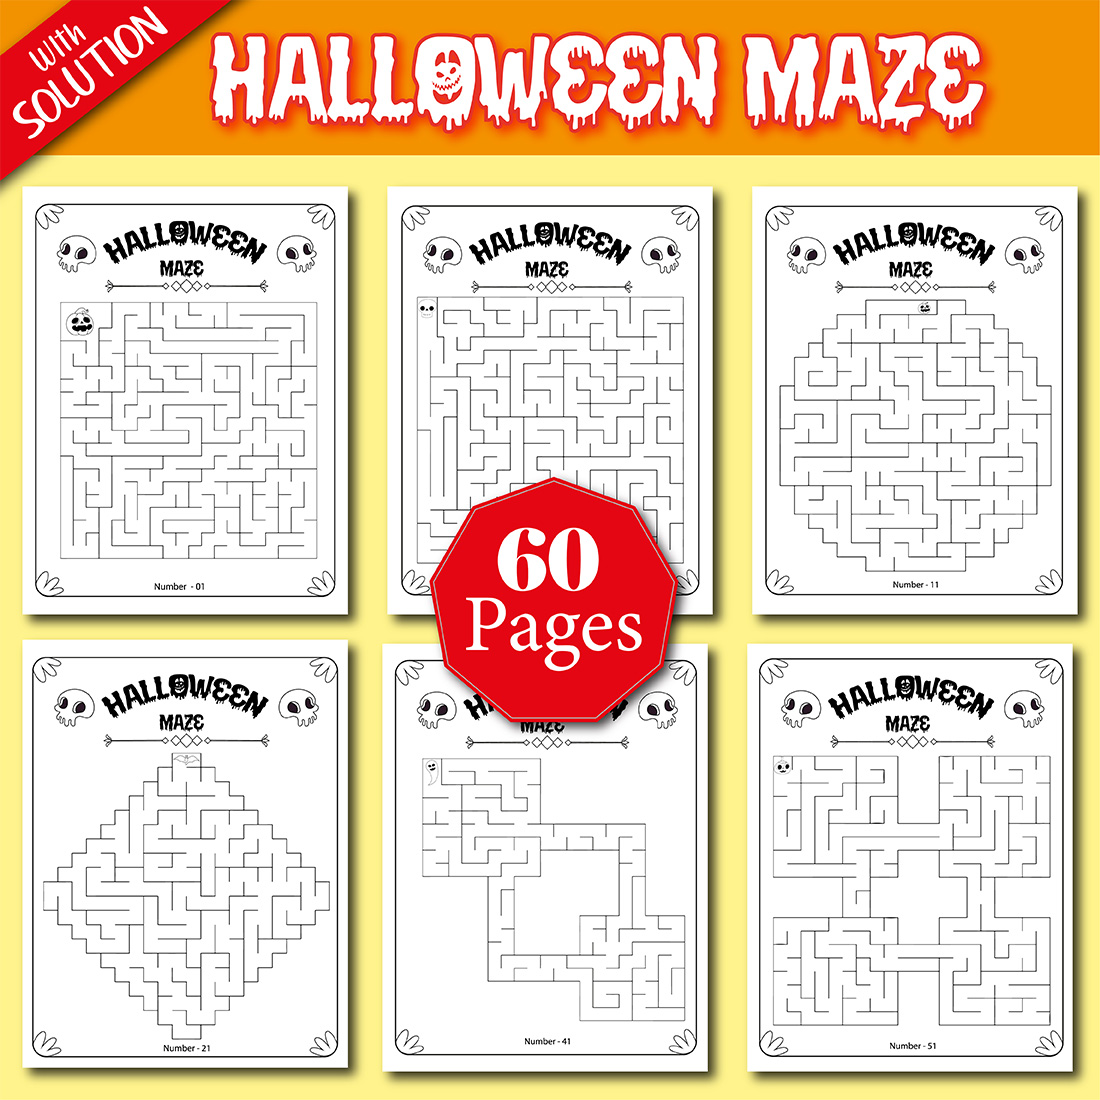 Halloween Mazes Activity Book For Kids Cover Image.